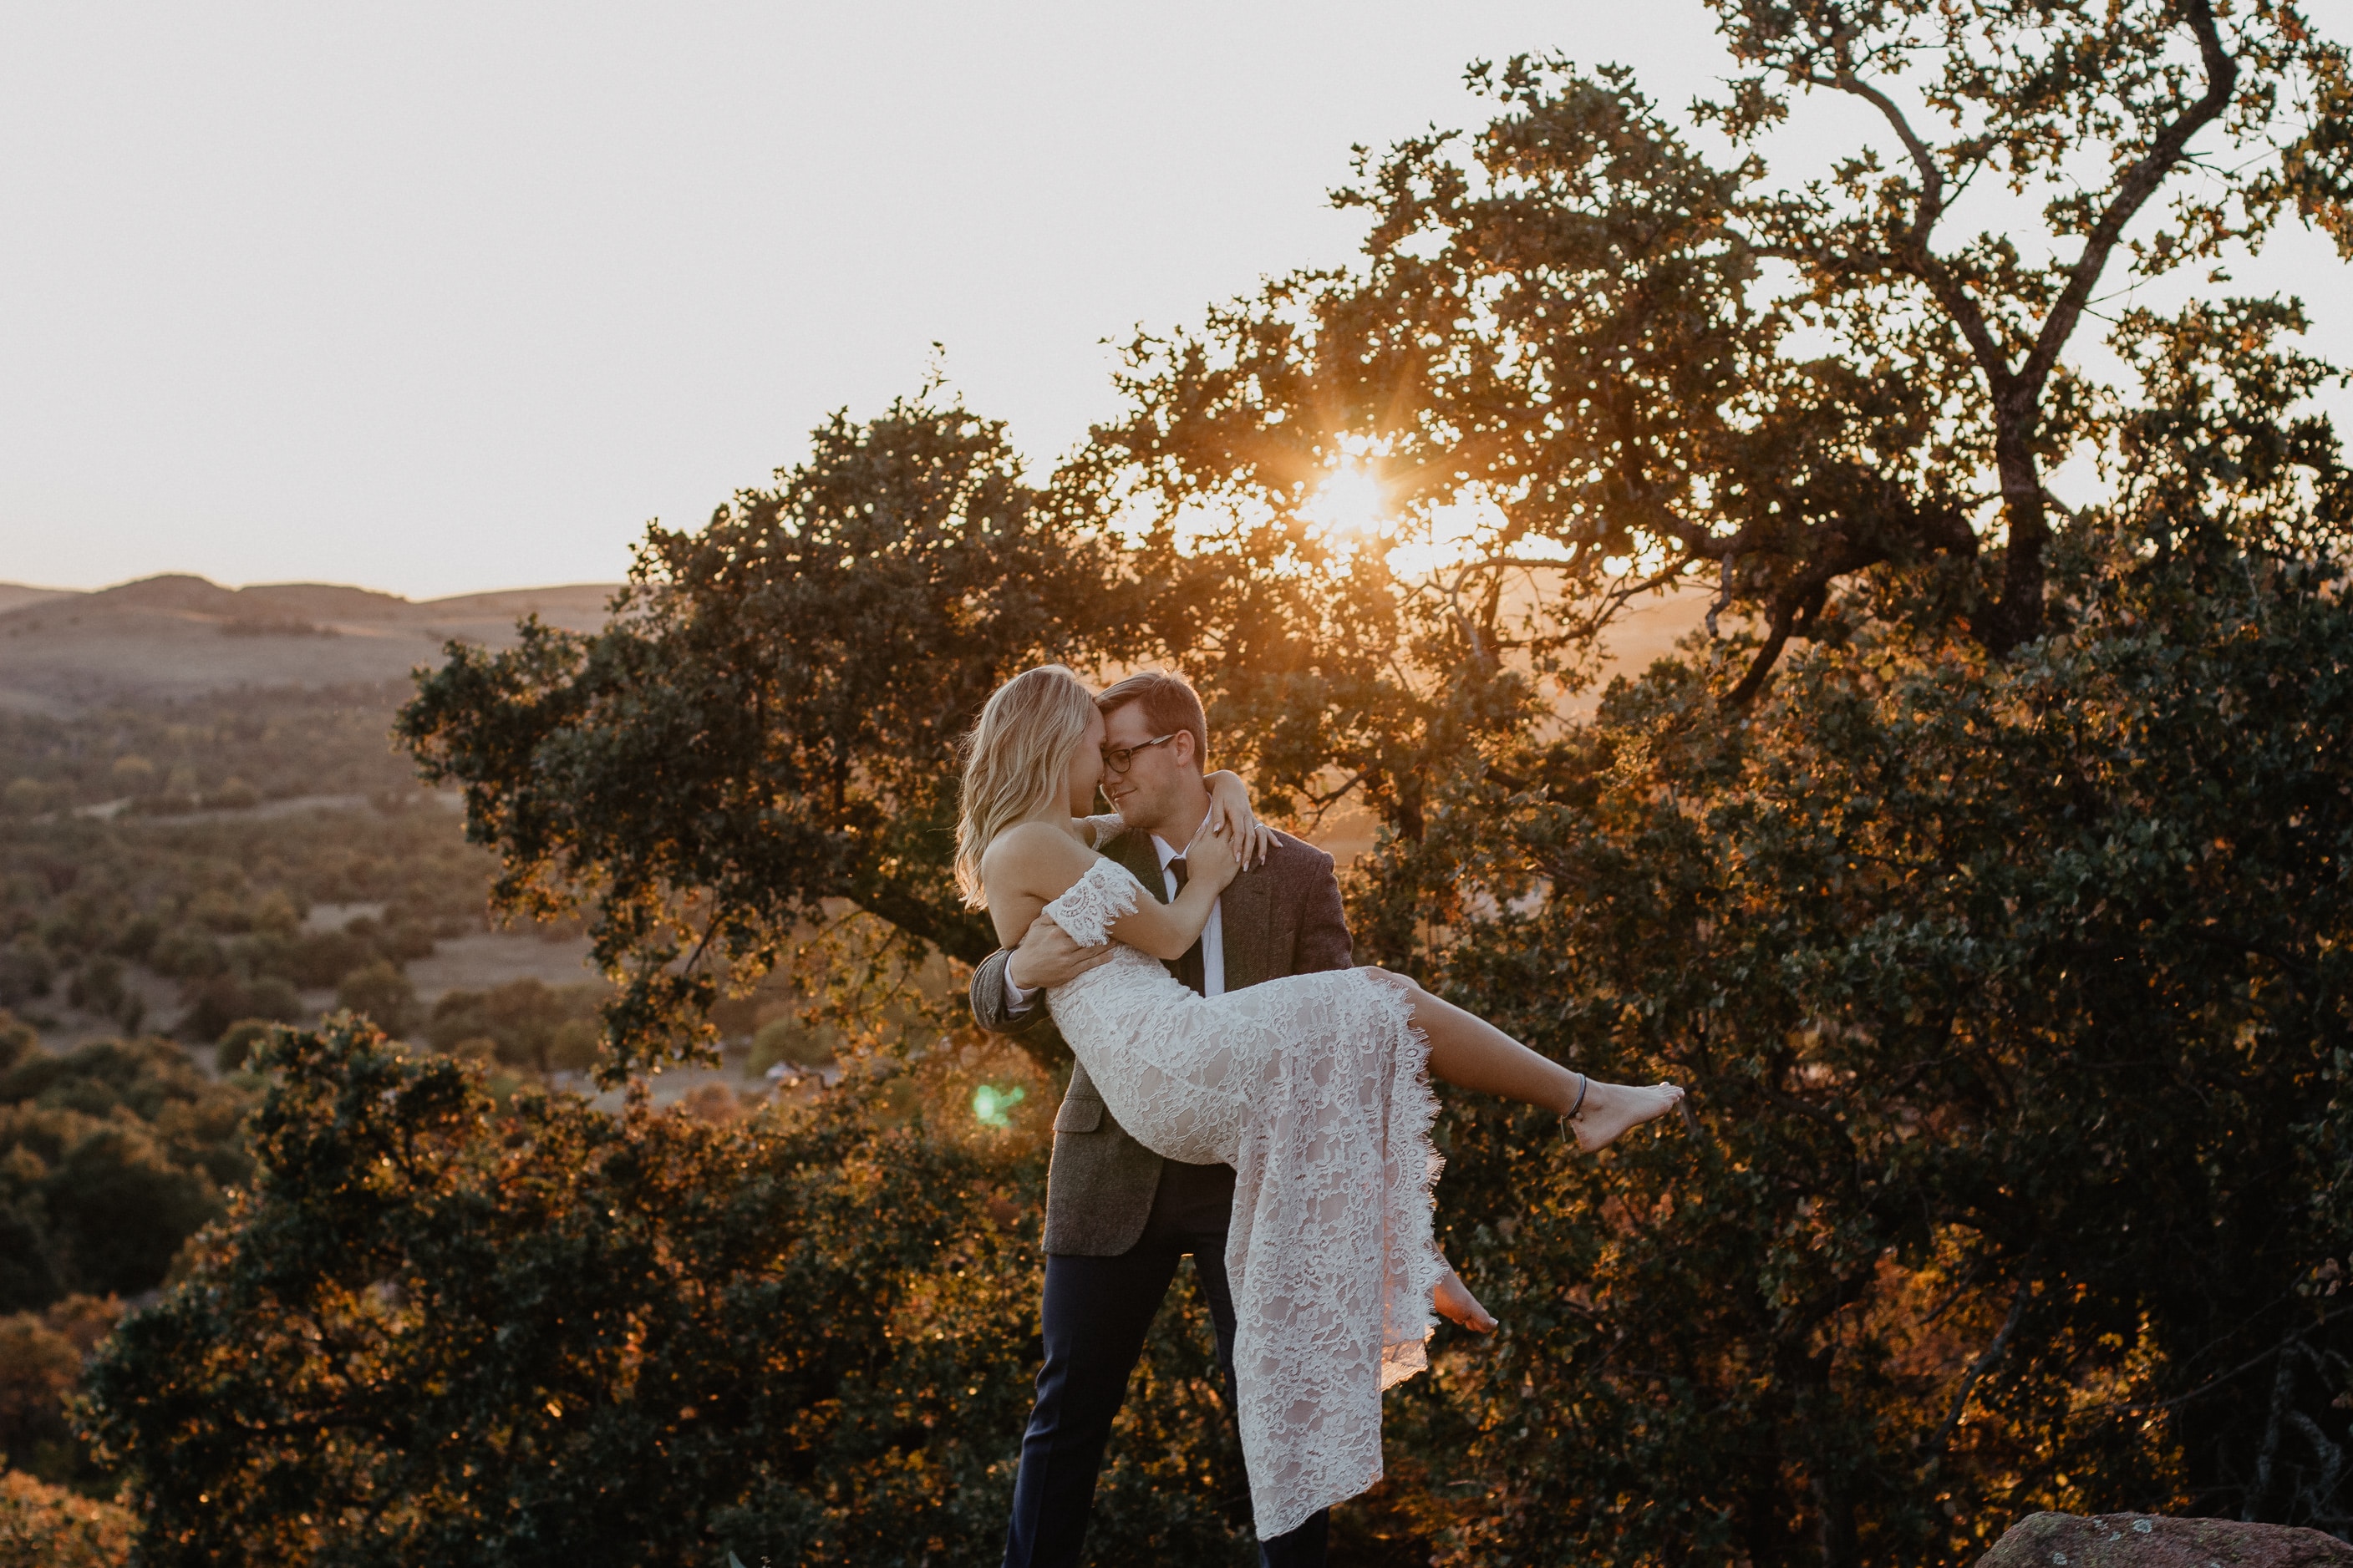 groom picking up his bride at sunset in front of a tree in a field